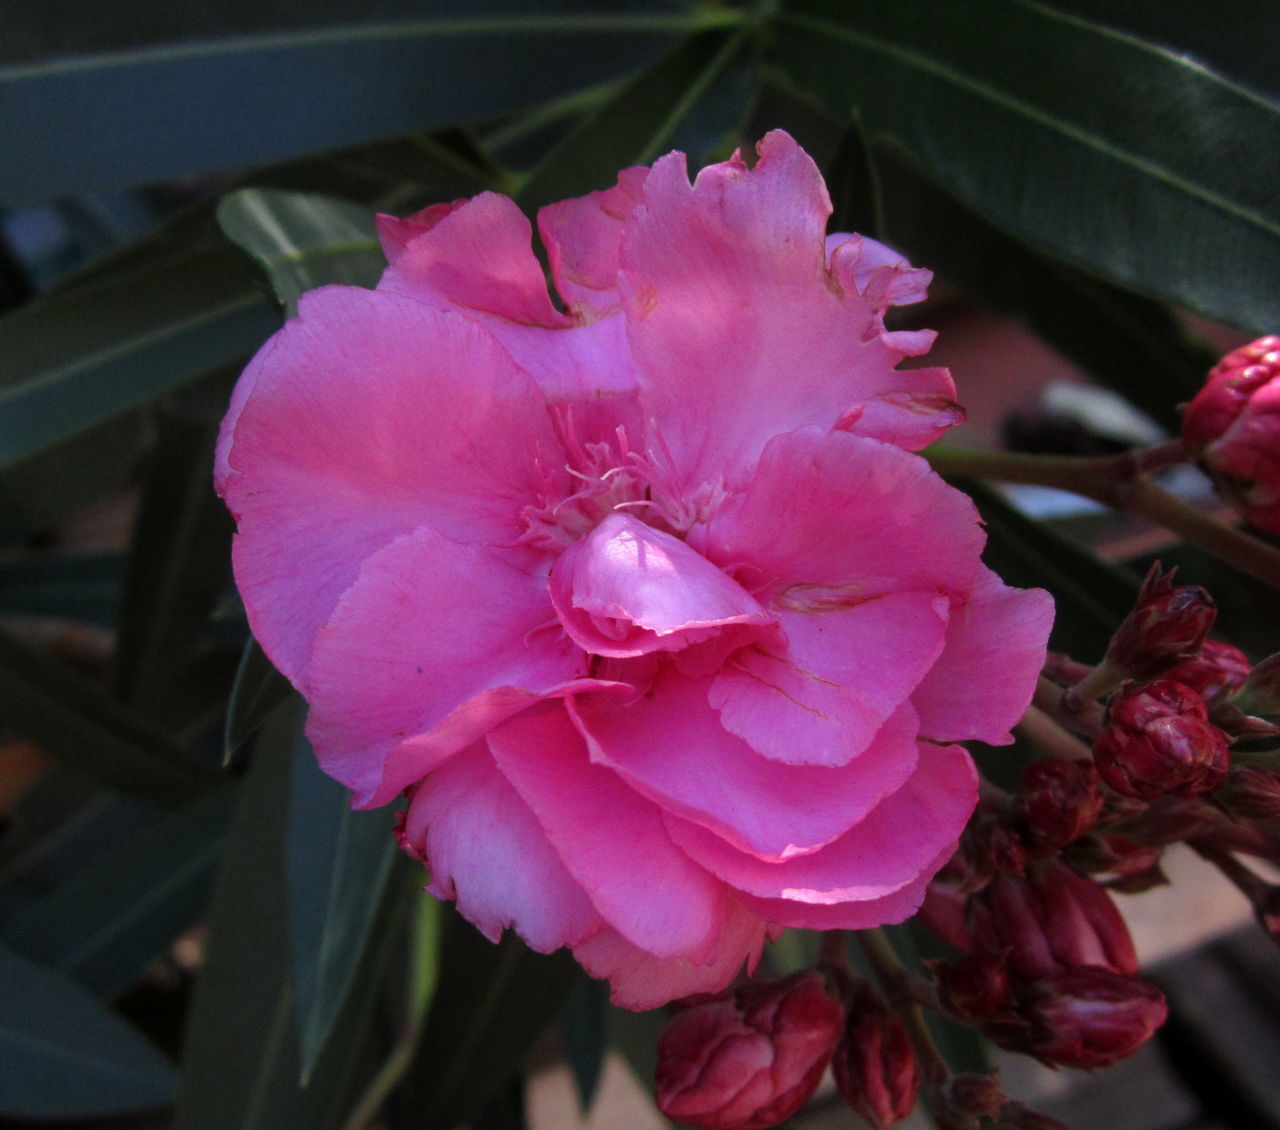 flower, flowering plant, plant, pink, freshness, beauty in nature, petal, close-up, fragility, inflorescence, flower head, camellia sasanqua, nature, growth, japanese camellia, no people, blossom, focus on foreground, outdoors, springtime, leaf, magenta, plant part, botany, pollen